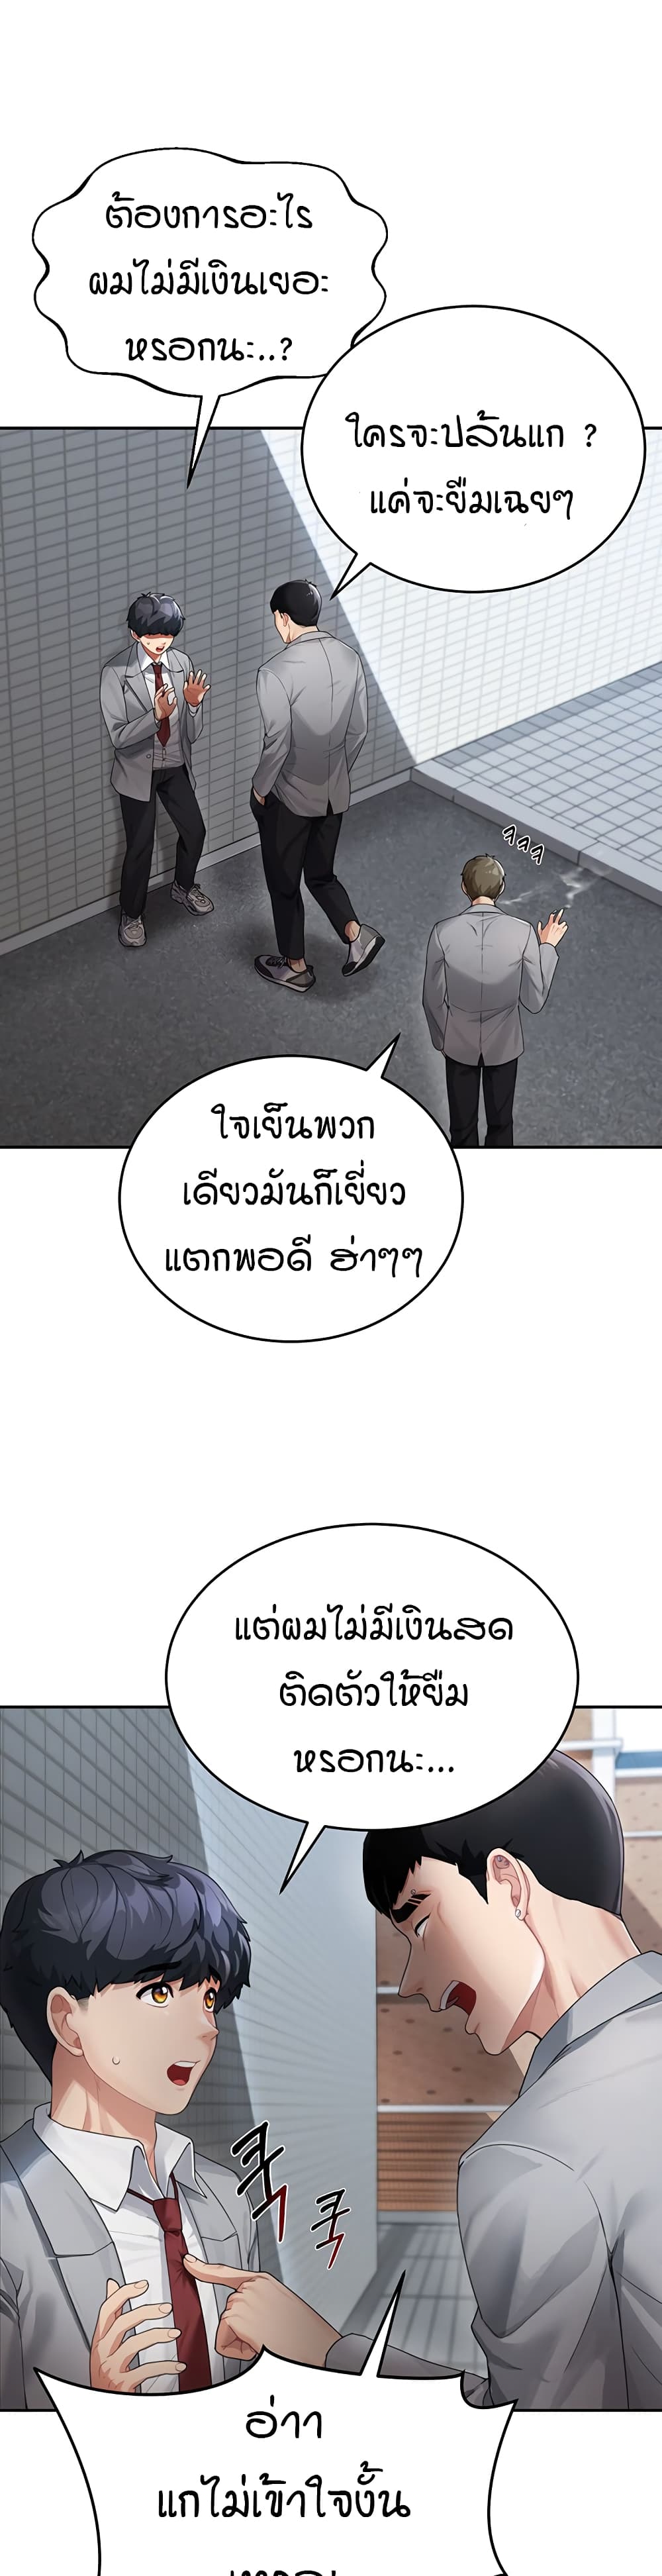 Is It Your Mother or Sister? ตอนที่ 1 ภาพ 10